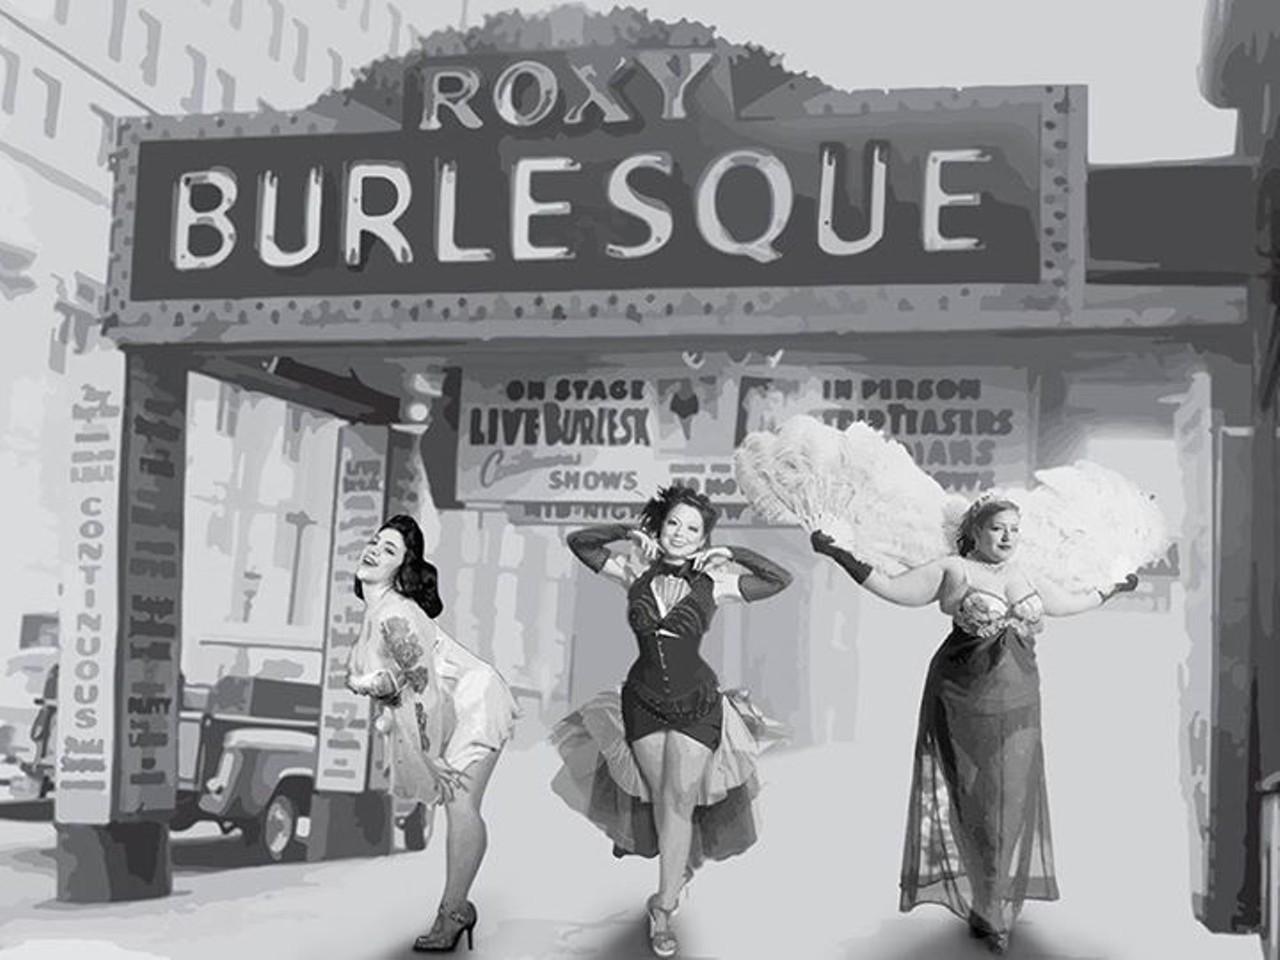 Every year, the folks at Ohio Burlesque pay homage to the burlesque of yesteryear with Roxy Remembered, an event that features a slew of popular local and regional dancers. This year, acts such as Lushes La Moan, Xander Lovecraft, Bella Sin and Doll Bambino are all slated to perform. In addition, the event features vaudeville acts, skits and live music. Admission is $15 for general admission and $20 for reserved seating. VIP tickets cost $30. (Niesel)